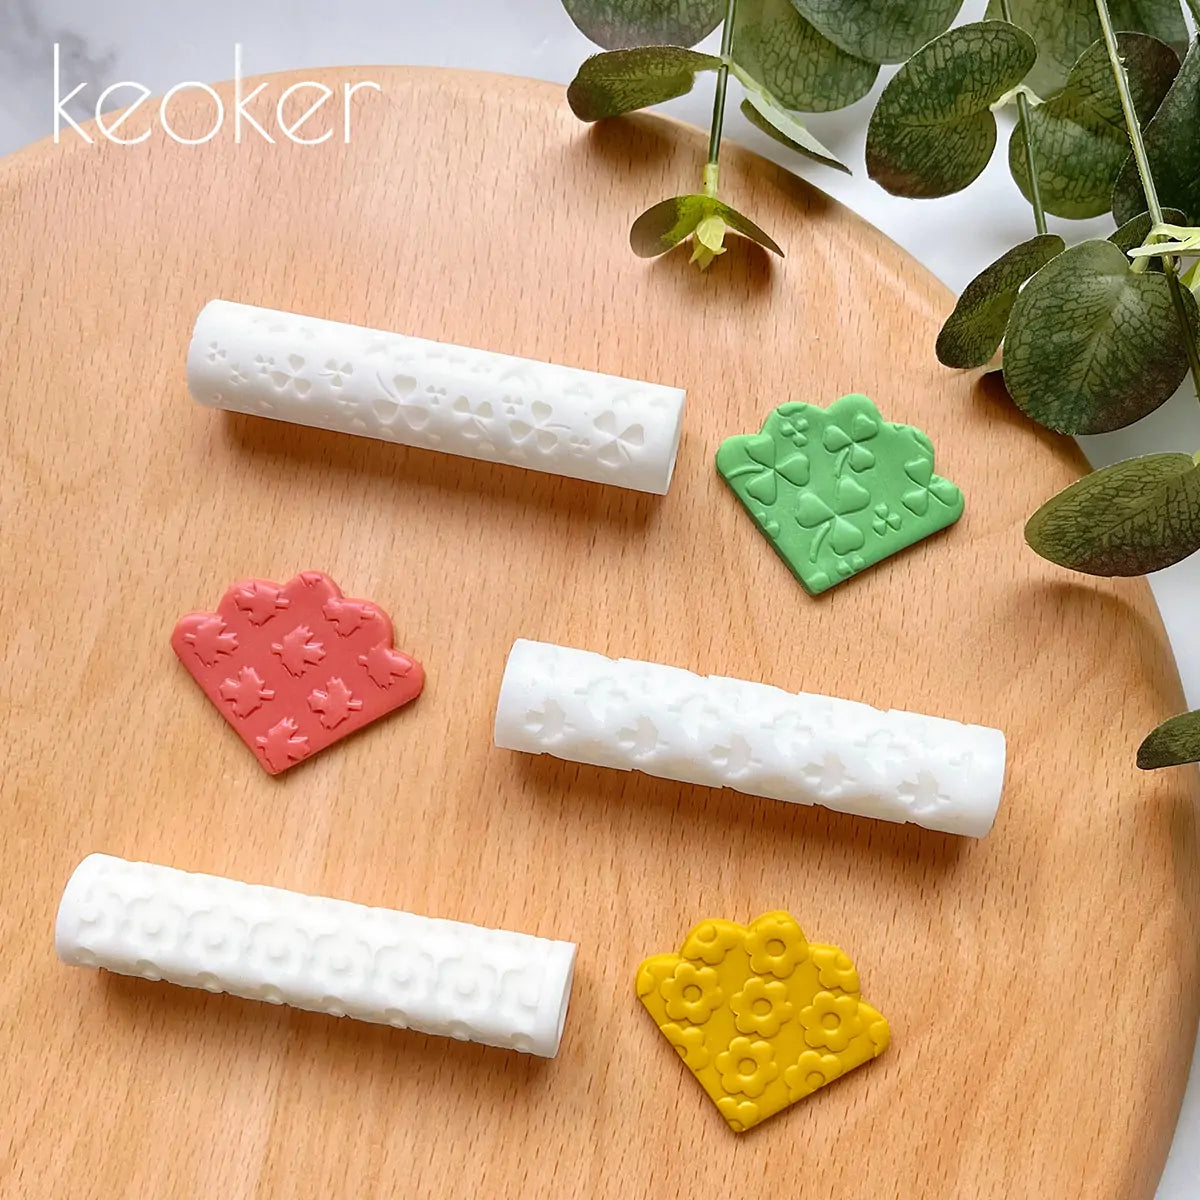 KEOKER Polymer Clay Texture Roller(3 Sample Pack)